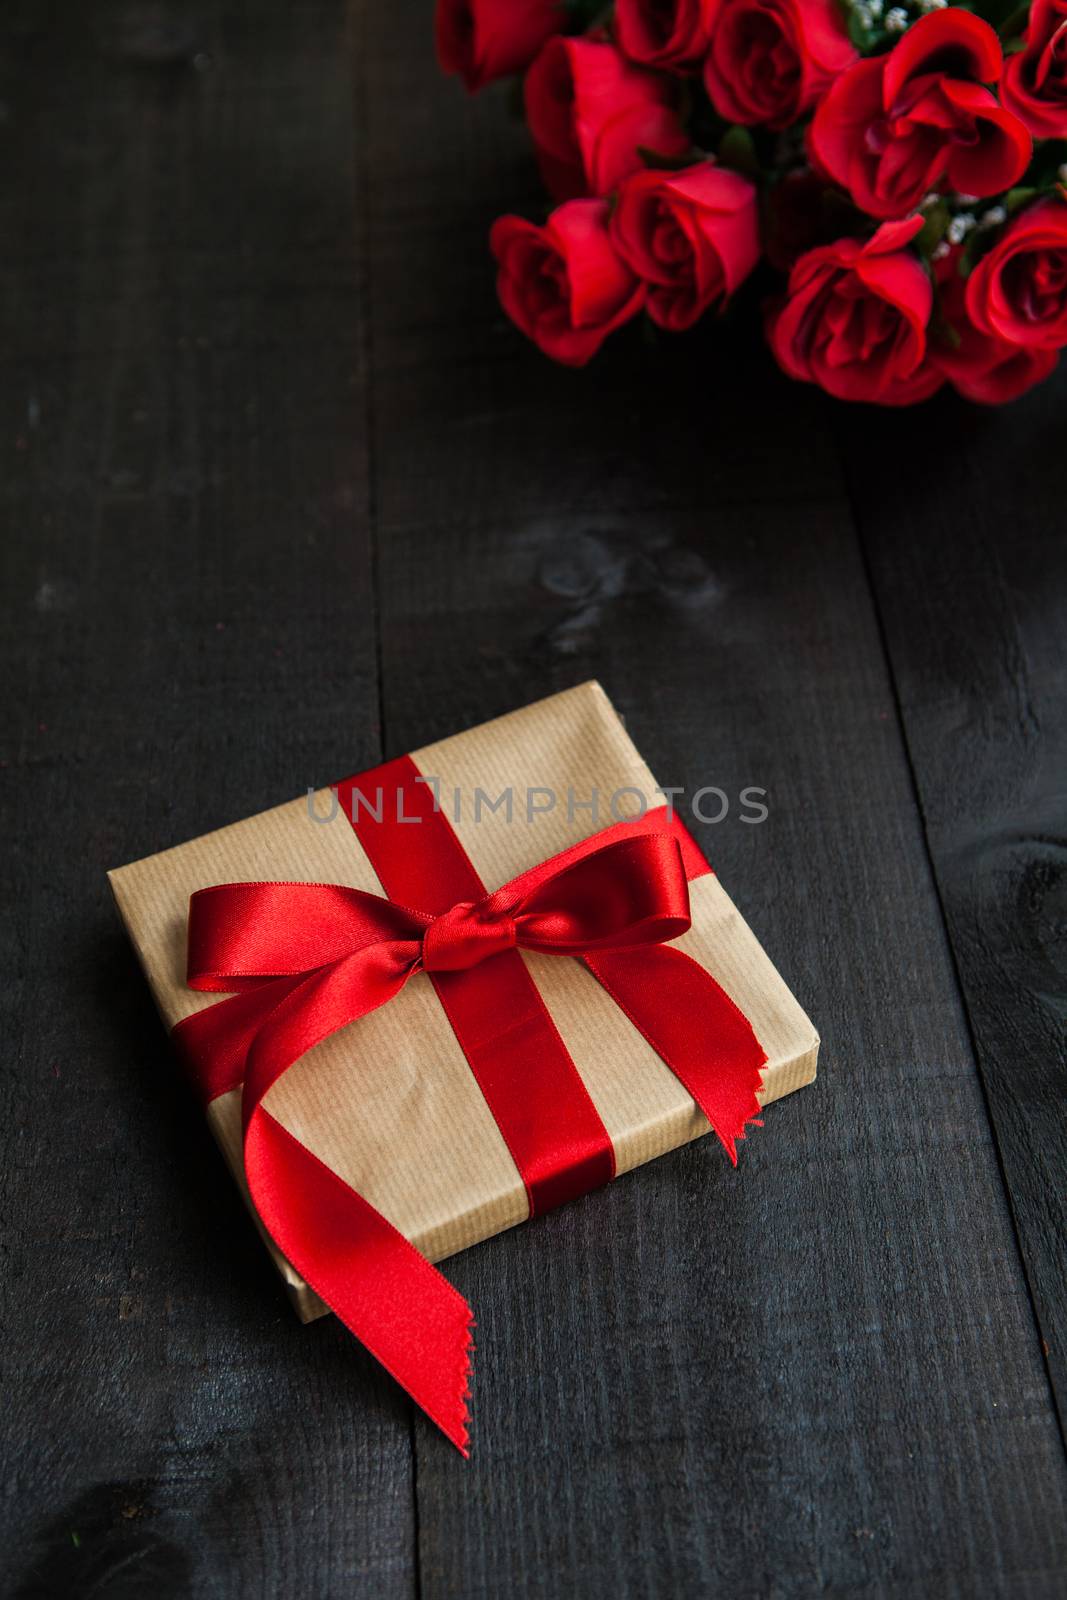 The image shows a wooden table with special composition for Saint Valentine, mother's day, father's day, christmas, love, marriage, dating....